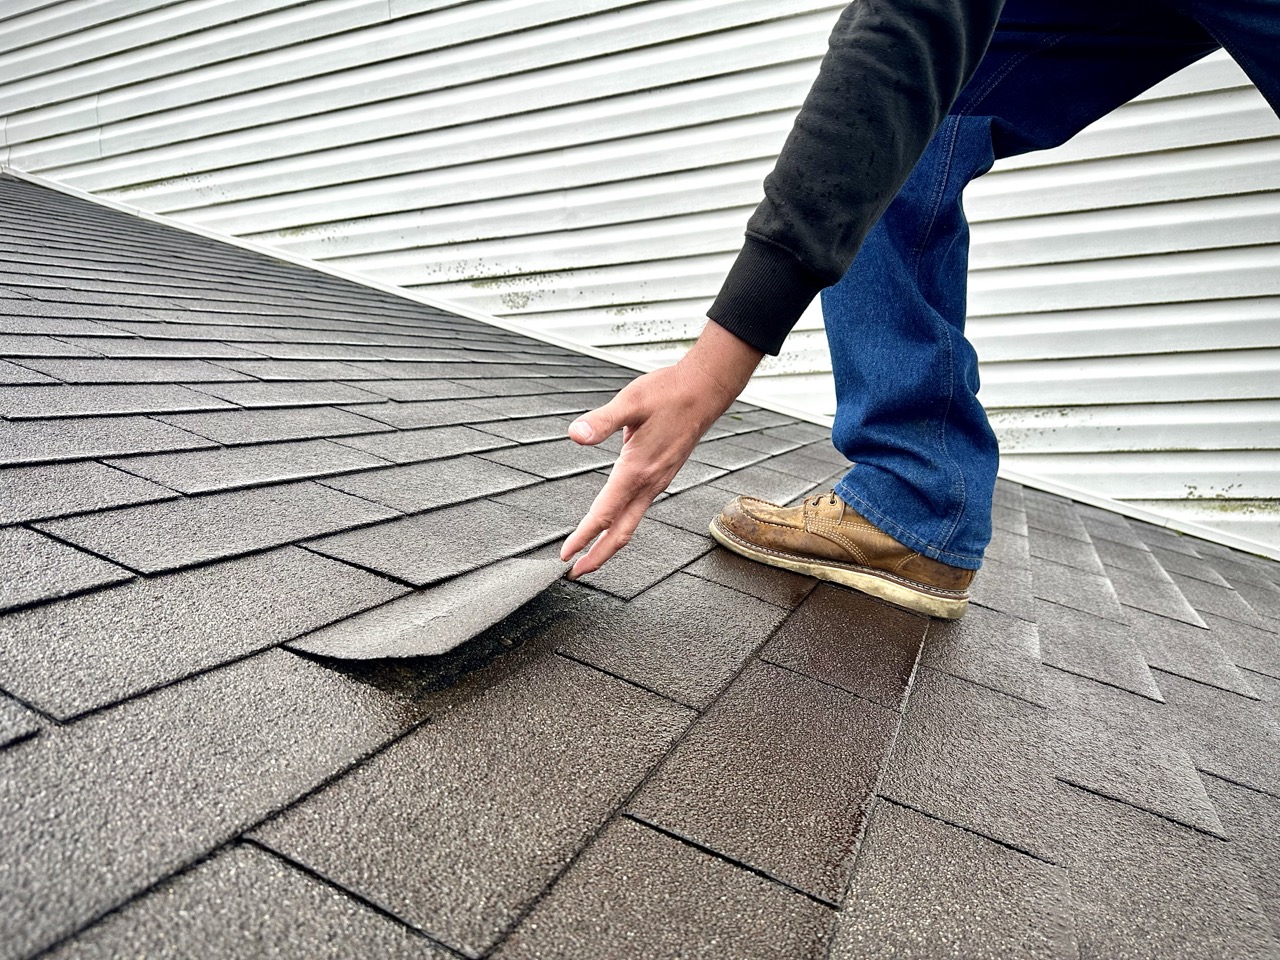 roof inspector in brown boots on an asphalt shingle roof inspecting the integrity of shingles